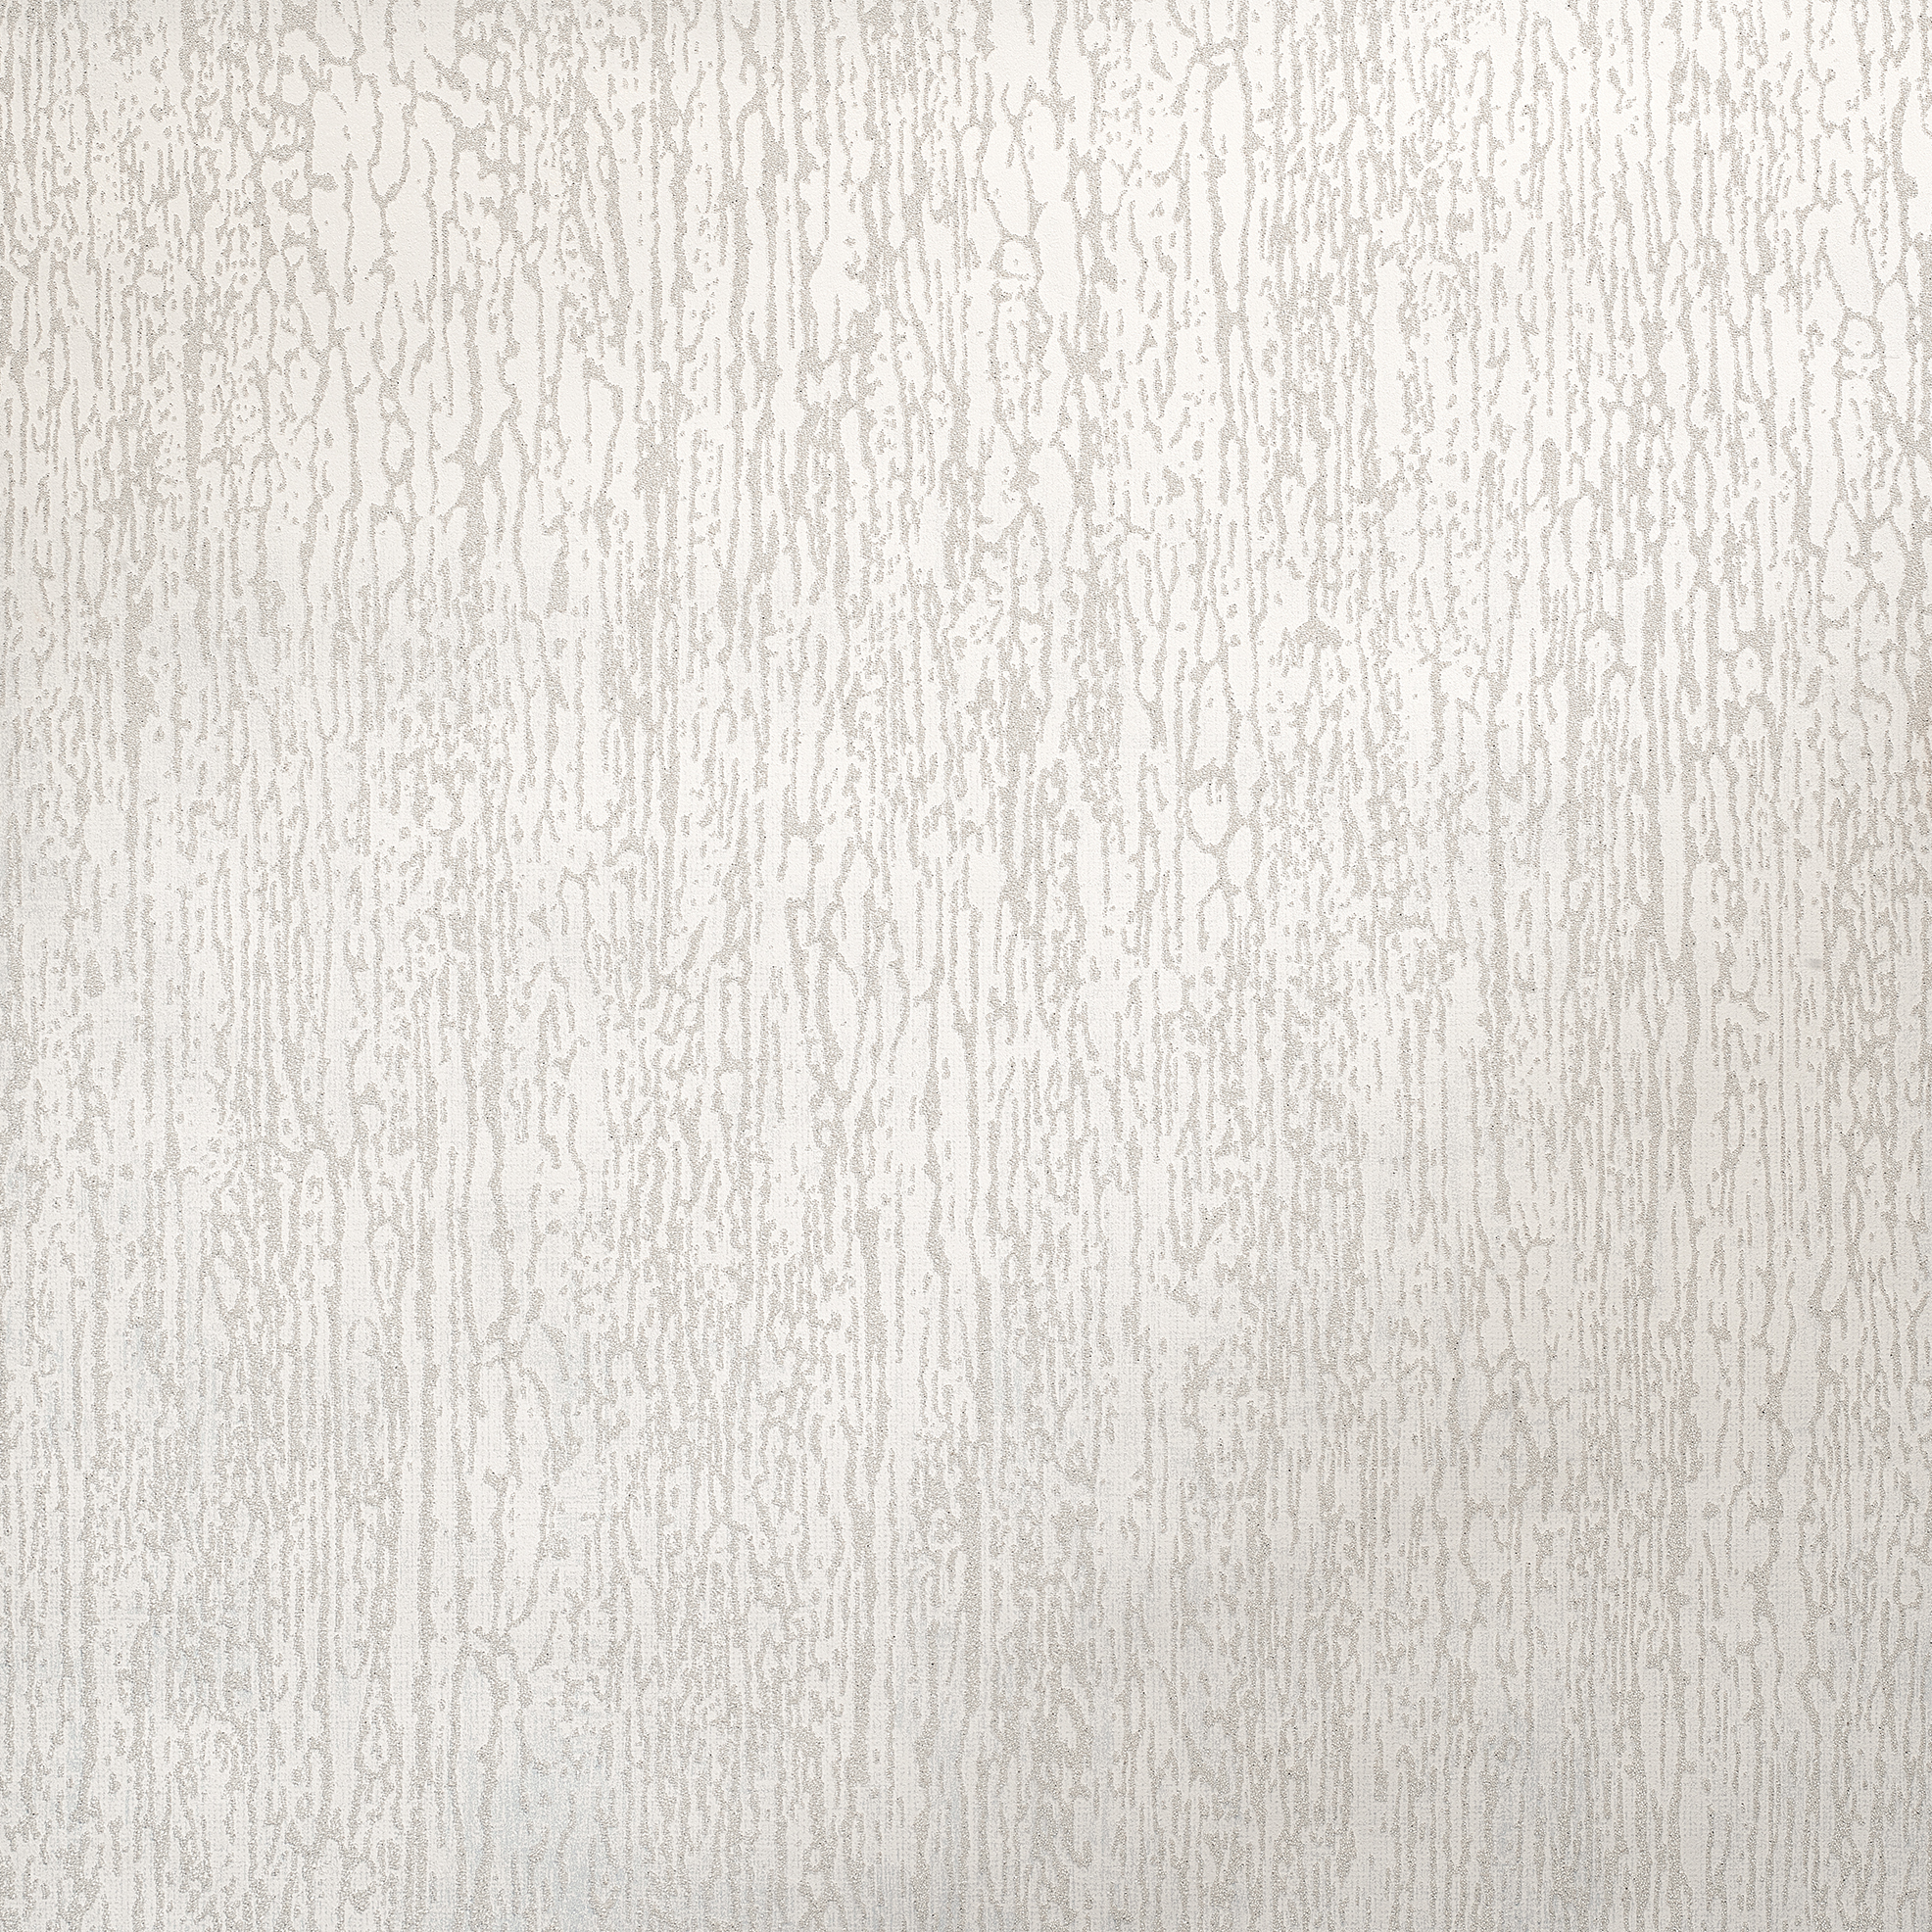 Plain wallpaper refined with real glass beads | Hohenberger